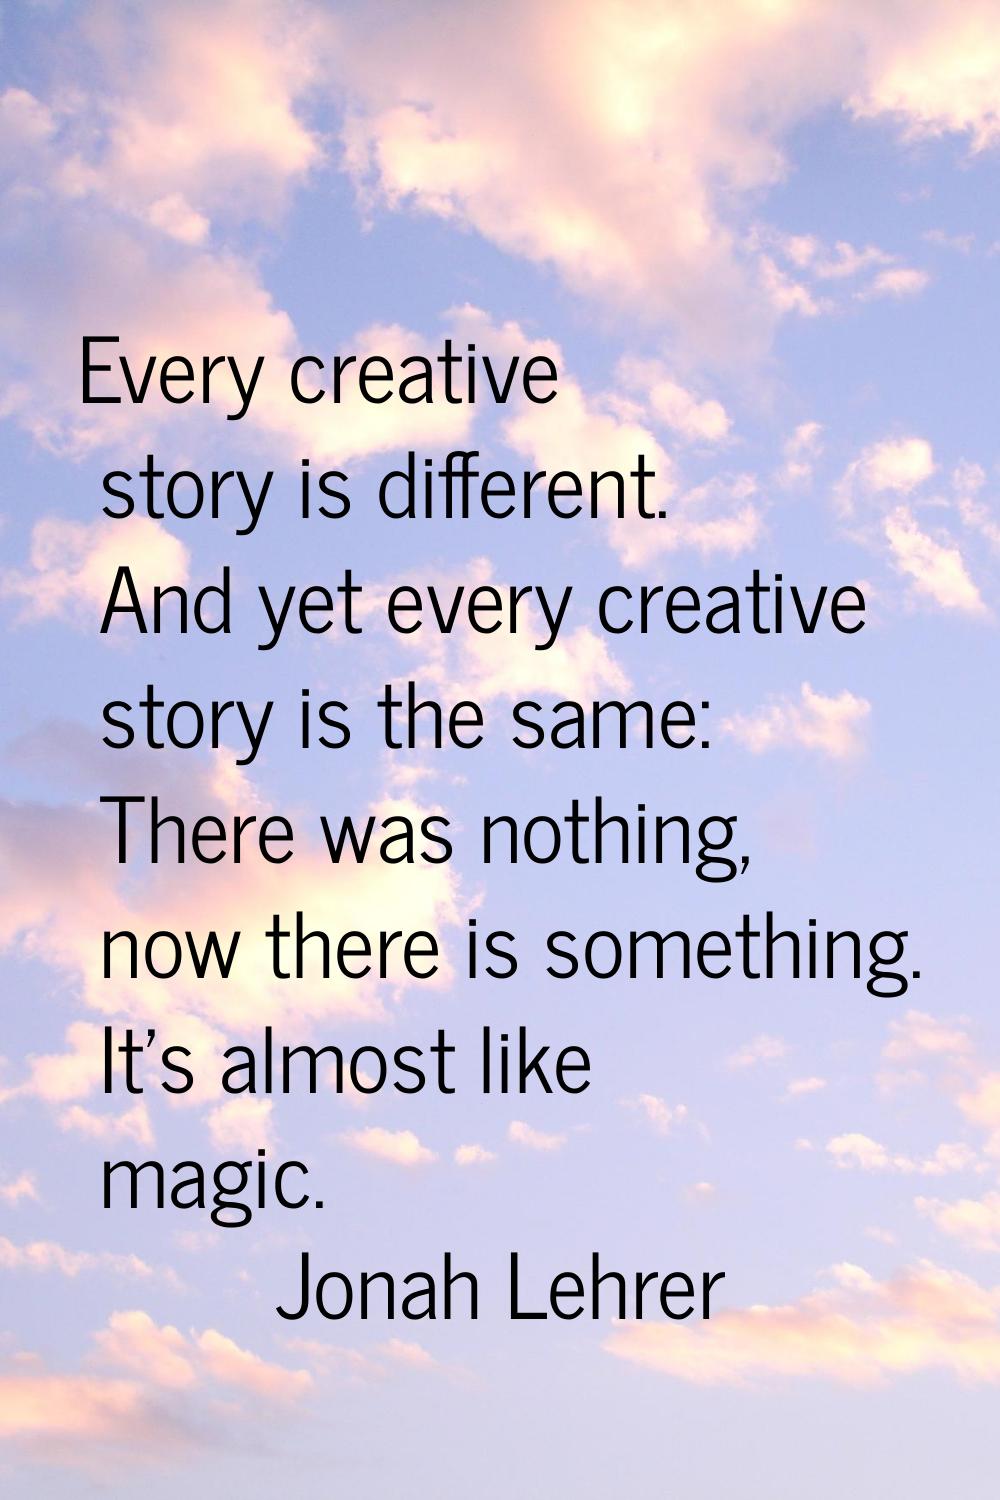 Every creative story is different. And yet every creative story is the same: There was nothing, now